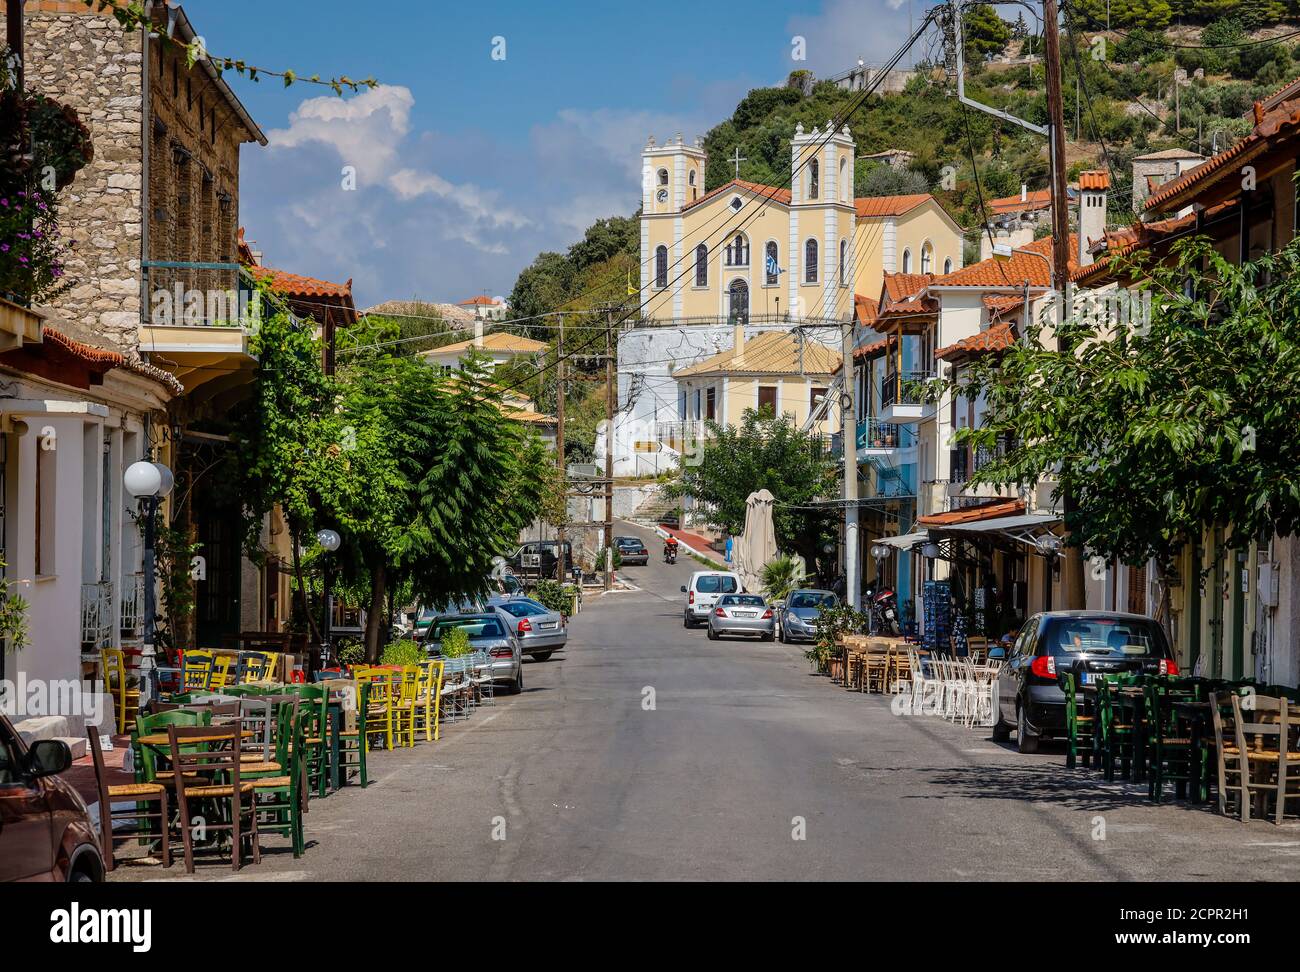 Kyparissia, Messenia, Peloponnese, Greece - City view in the upper town with street cafes and restaurants, view towards the Church of the Holy Trinity Stock Photo